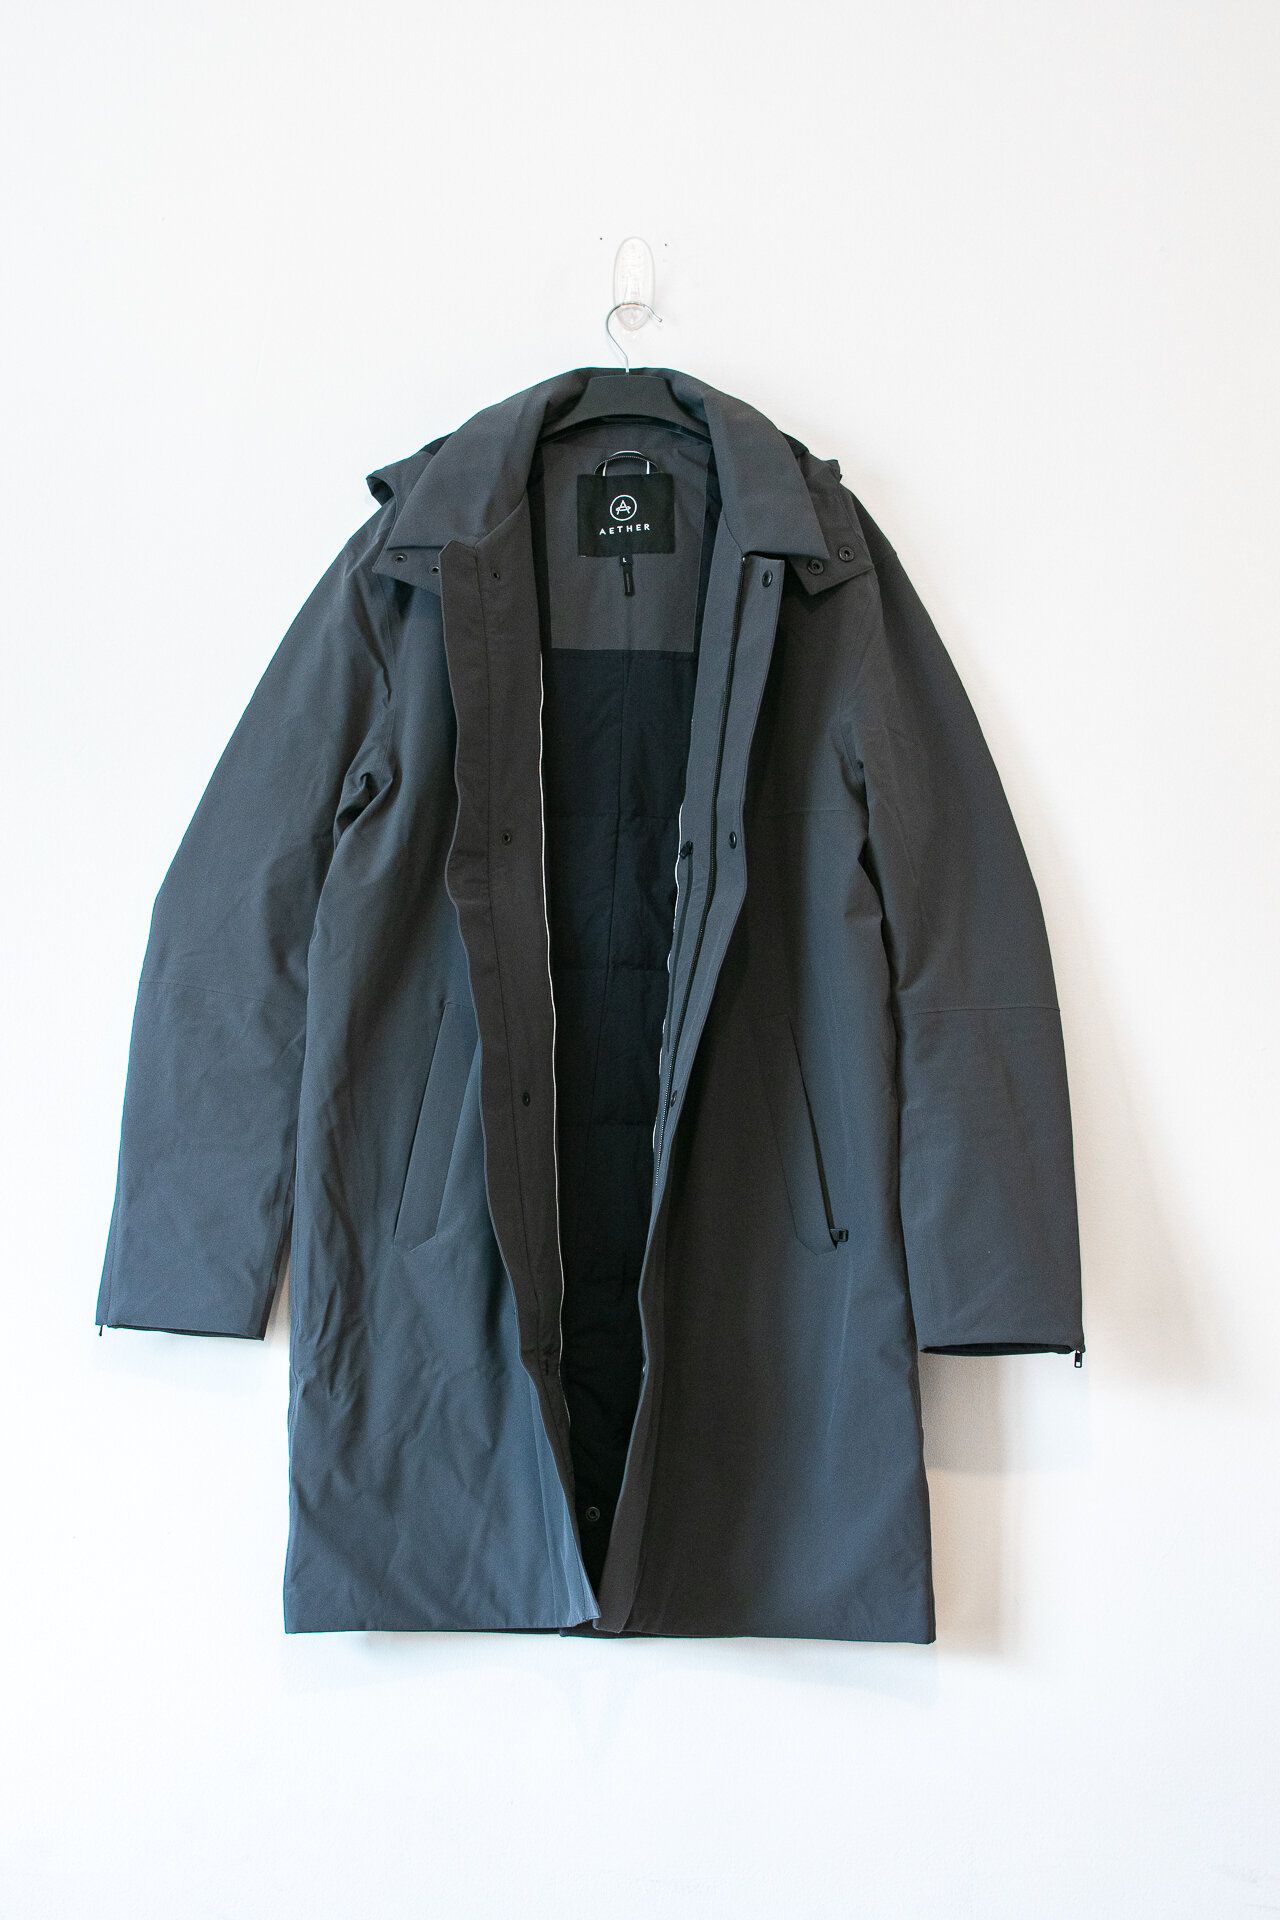 aether-barrow-jacket-front-2.jpg